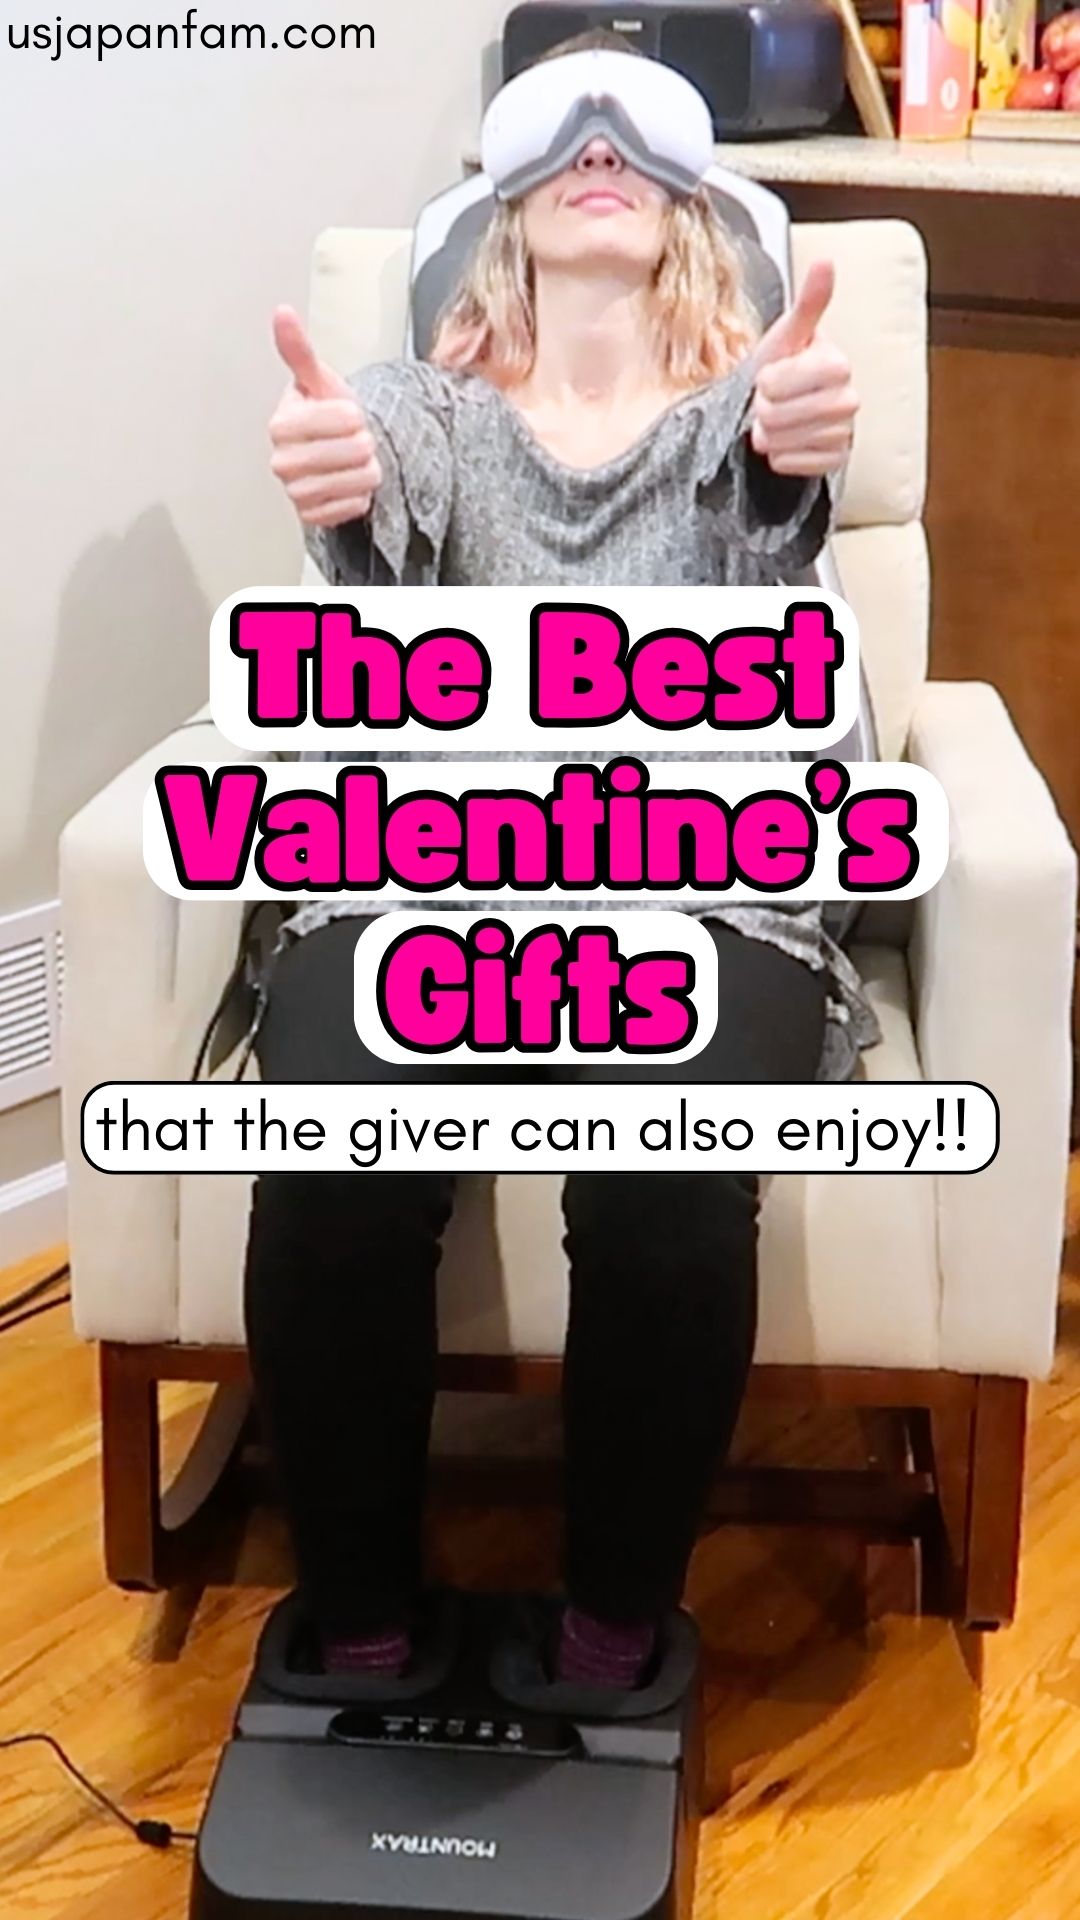 9 Valentine's Gifts to Spoil Your Loved One... and YOURSELF! - US Japan Fam